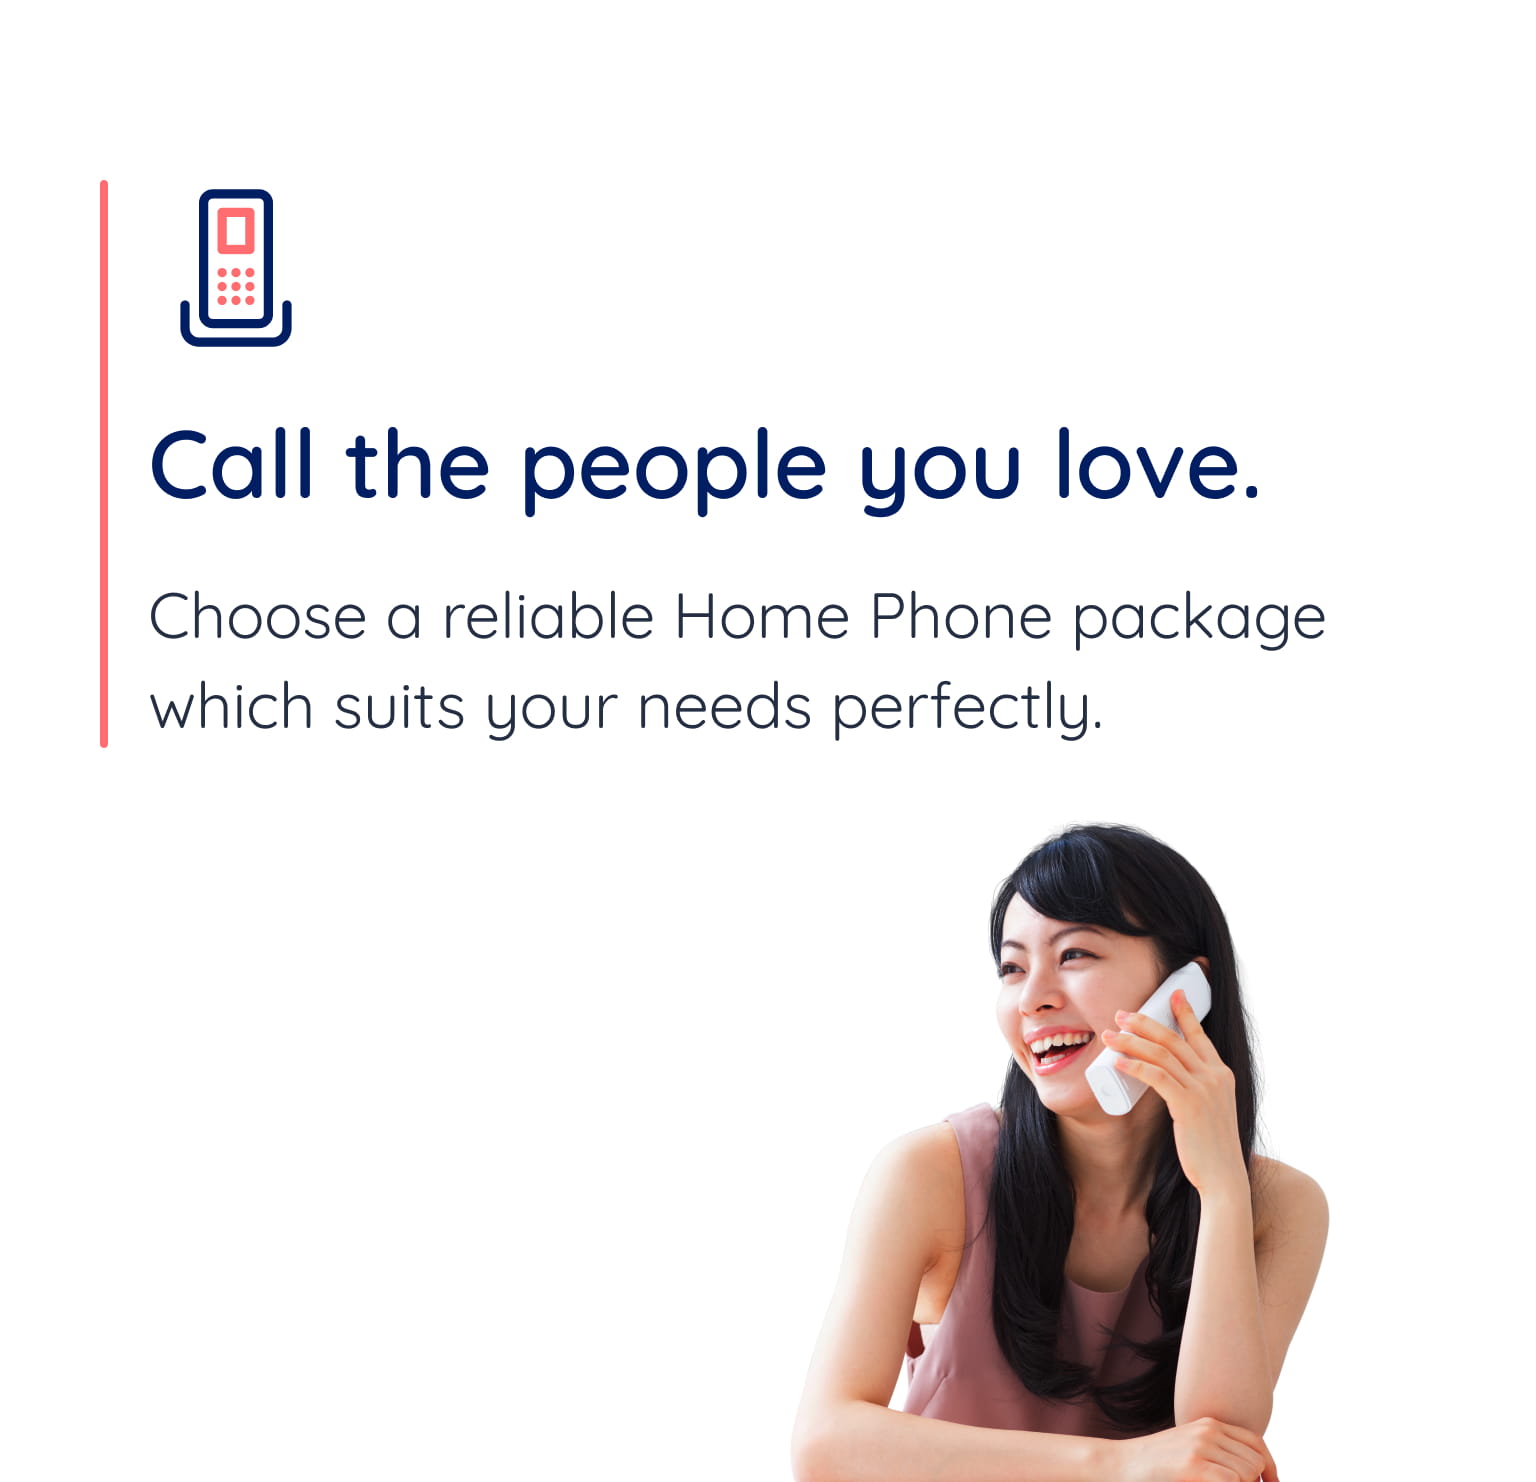 Call the people you love. Choose a reliable Home Phone package which suits your needs perfectly.